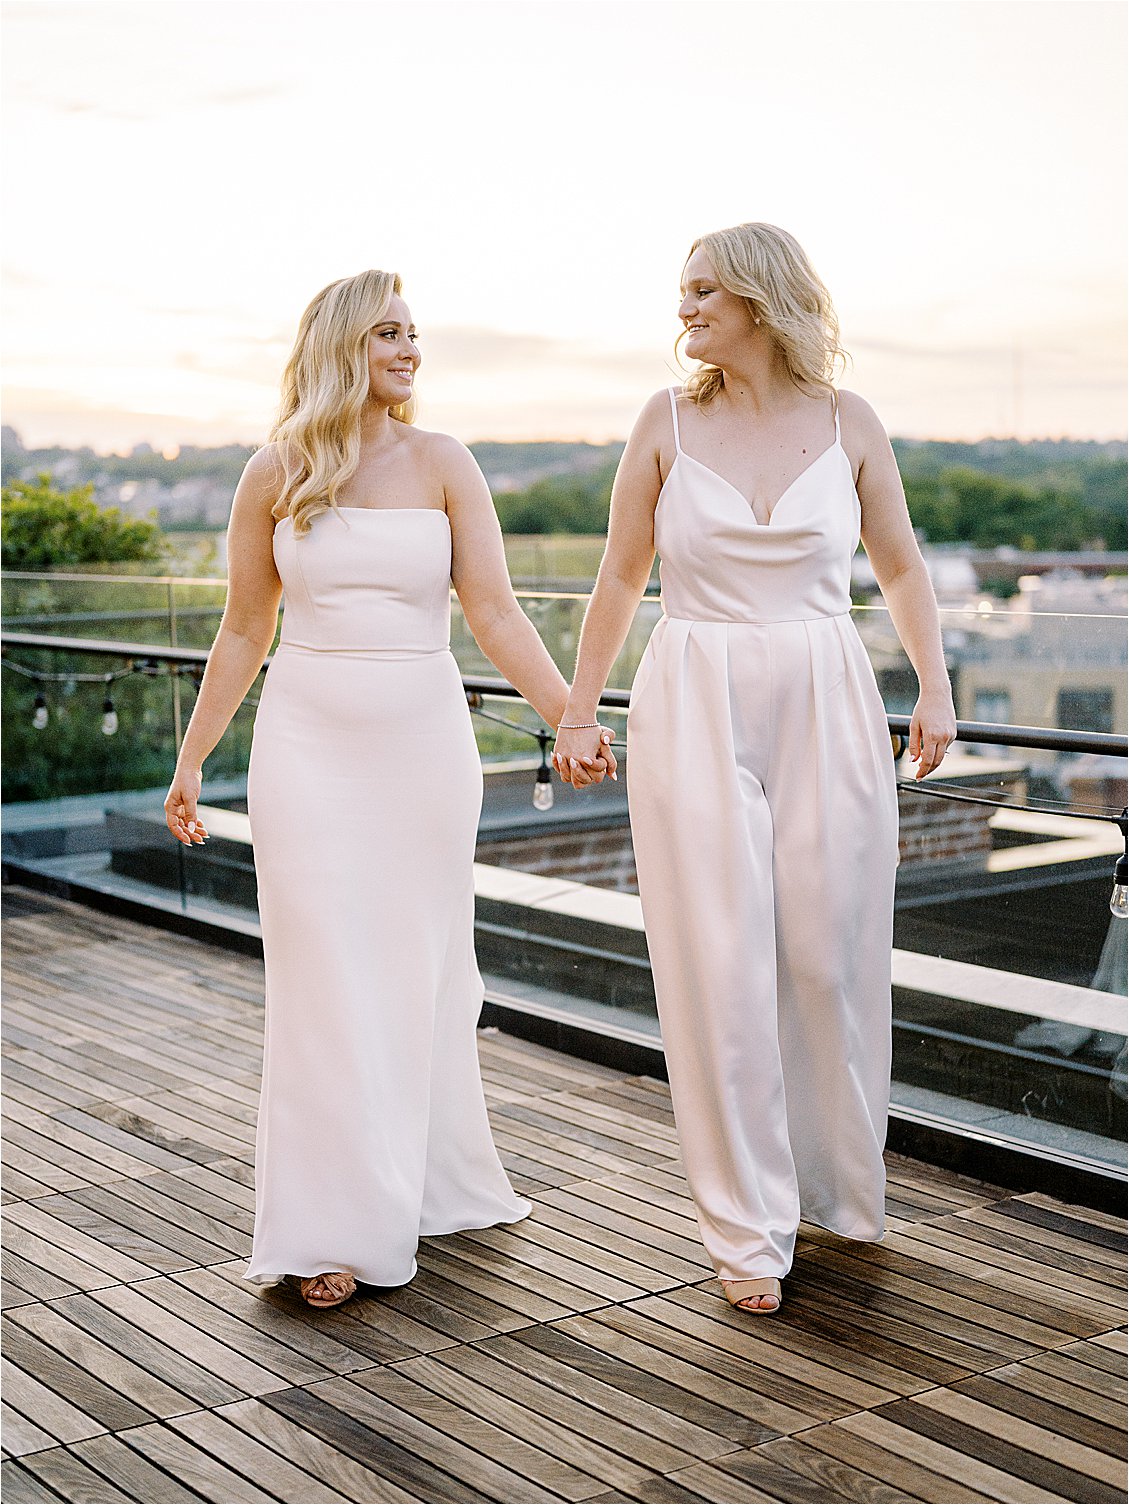 Brides on the rooftop during golden hour at The Line Hotel in Washington DC with film wedding photographer Renee Hollingshead